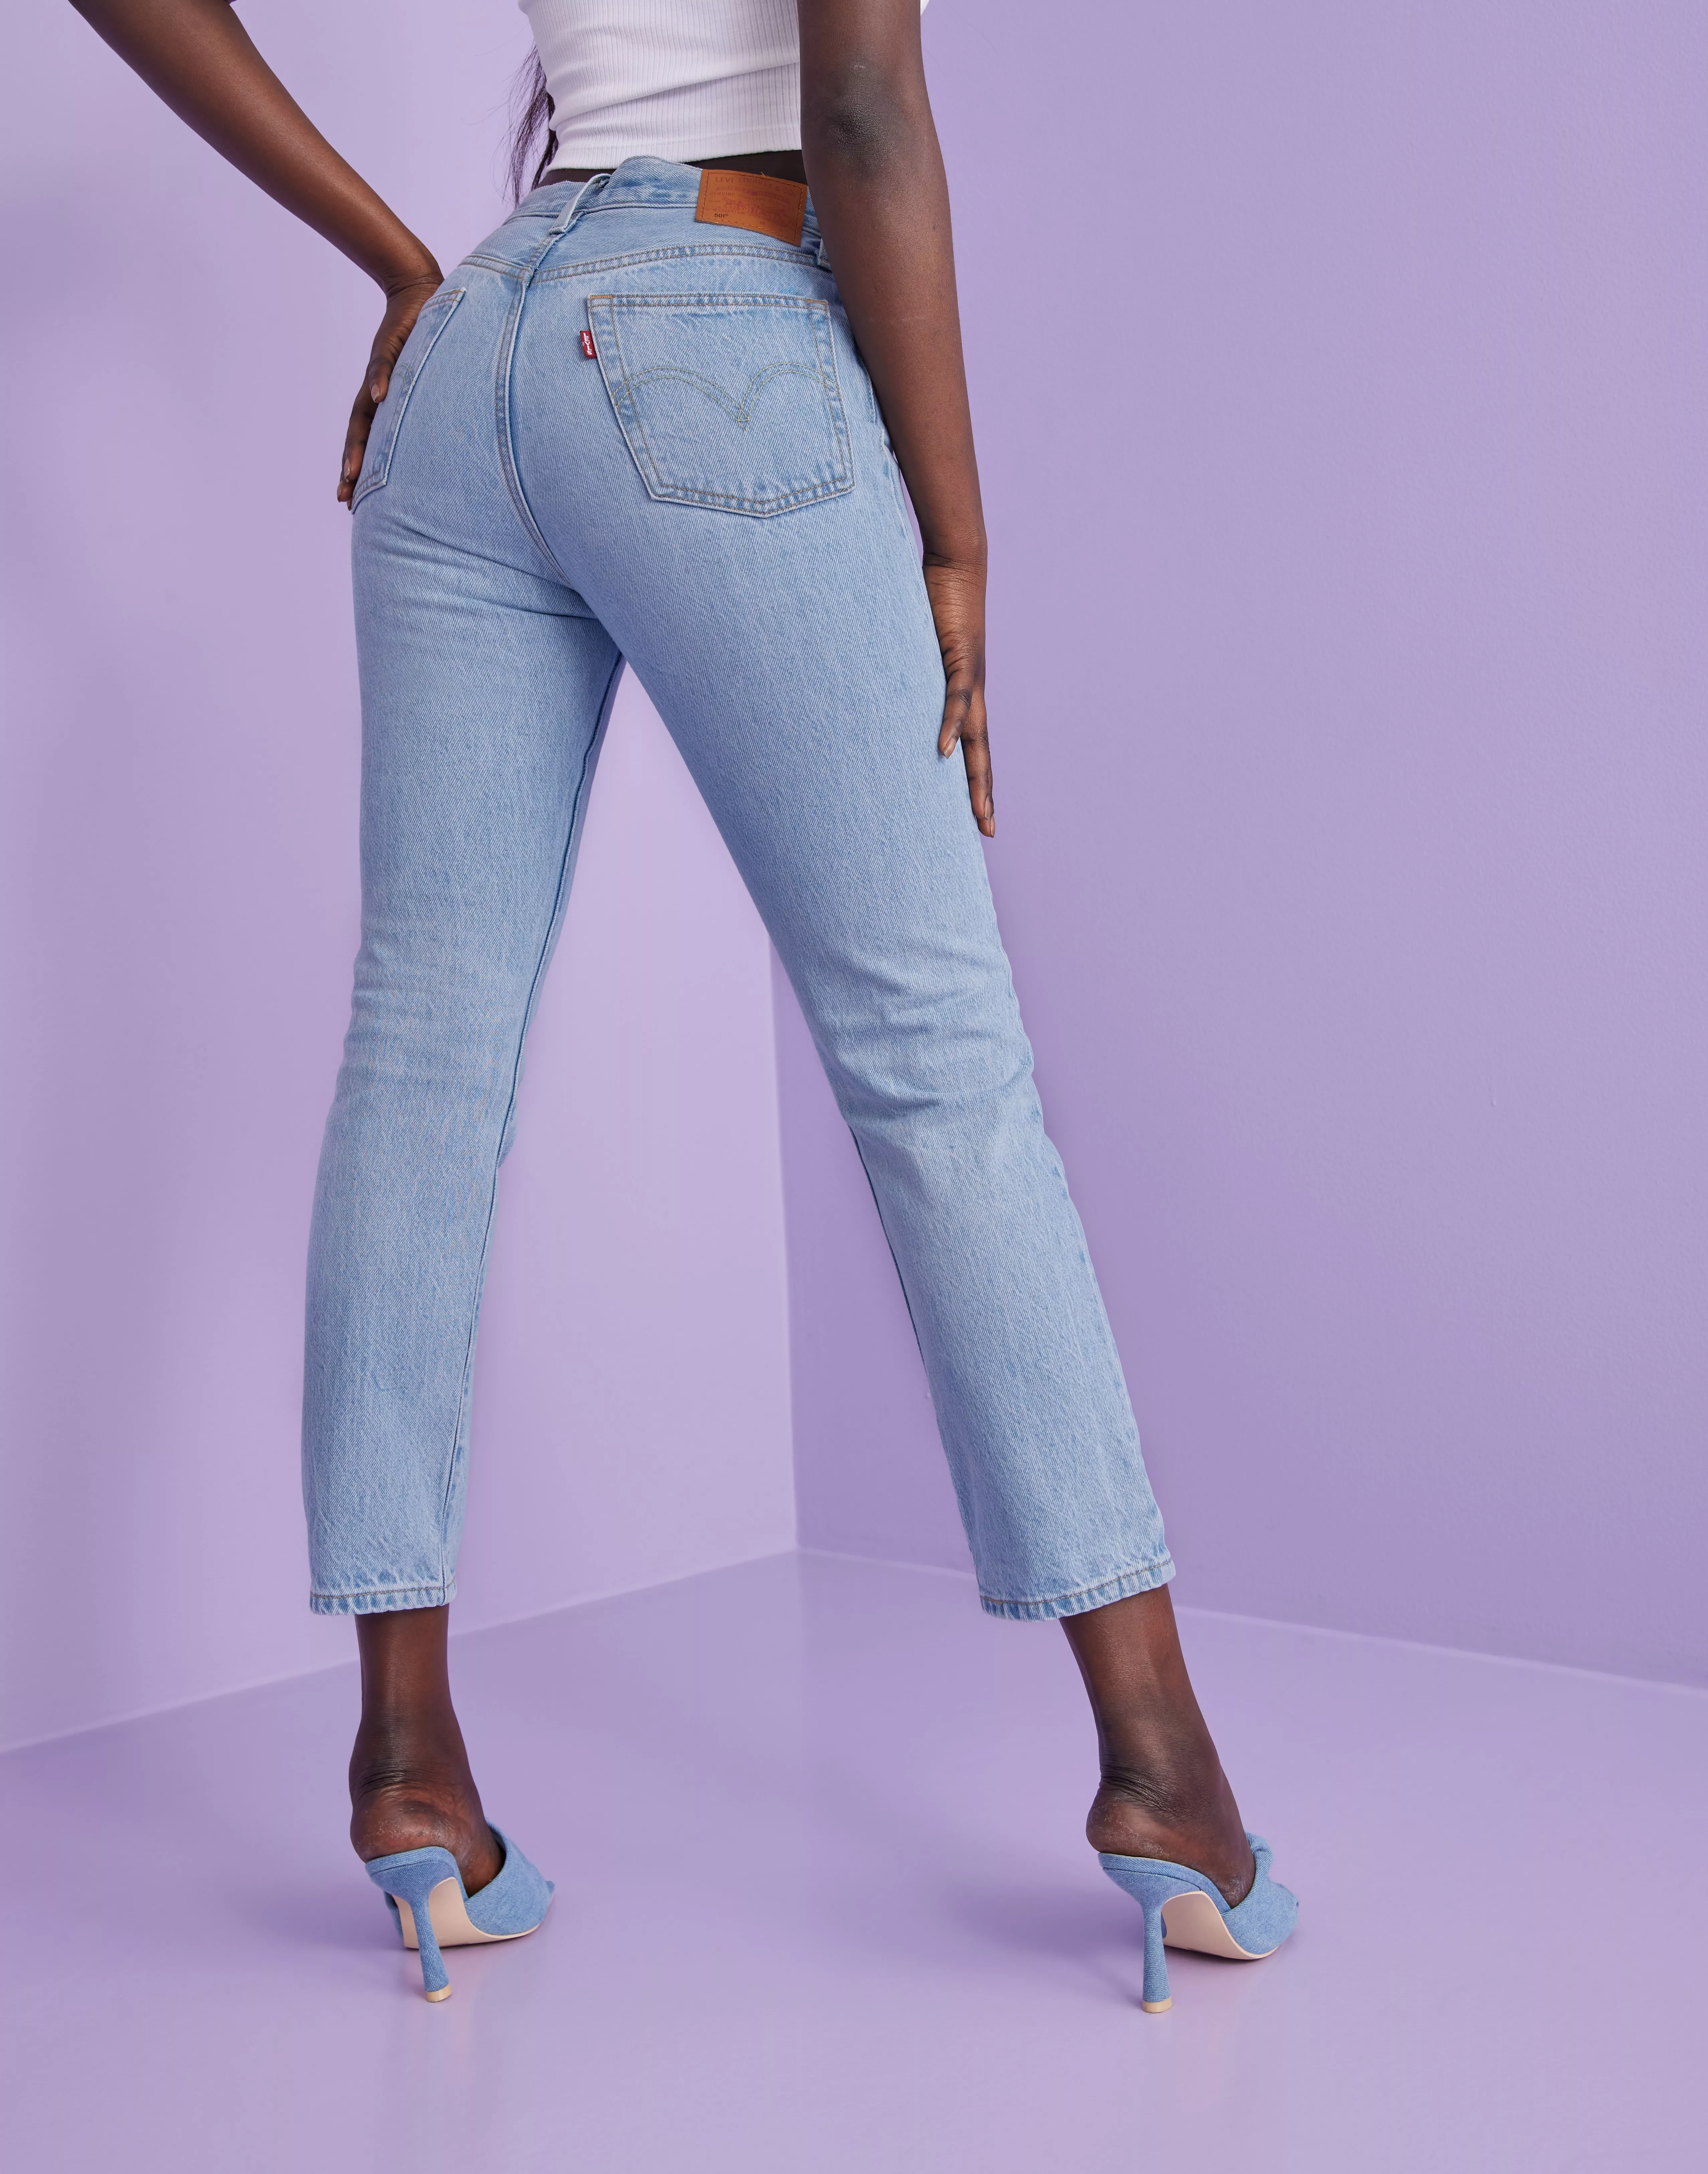 Levi's 501 Straight Leg Jeans: A Team Try-On & Review - The Mom Edit